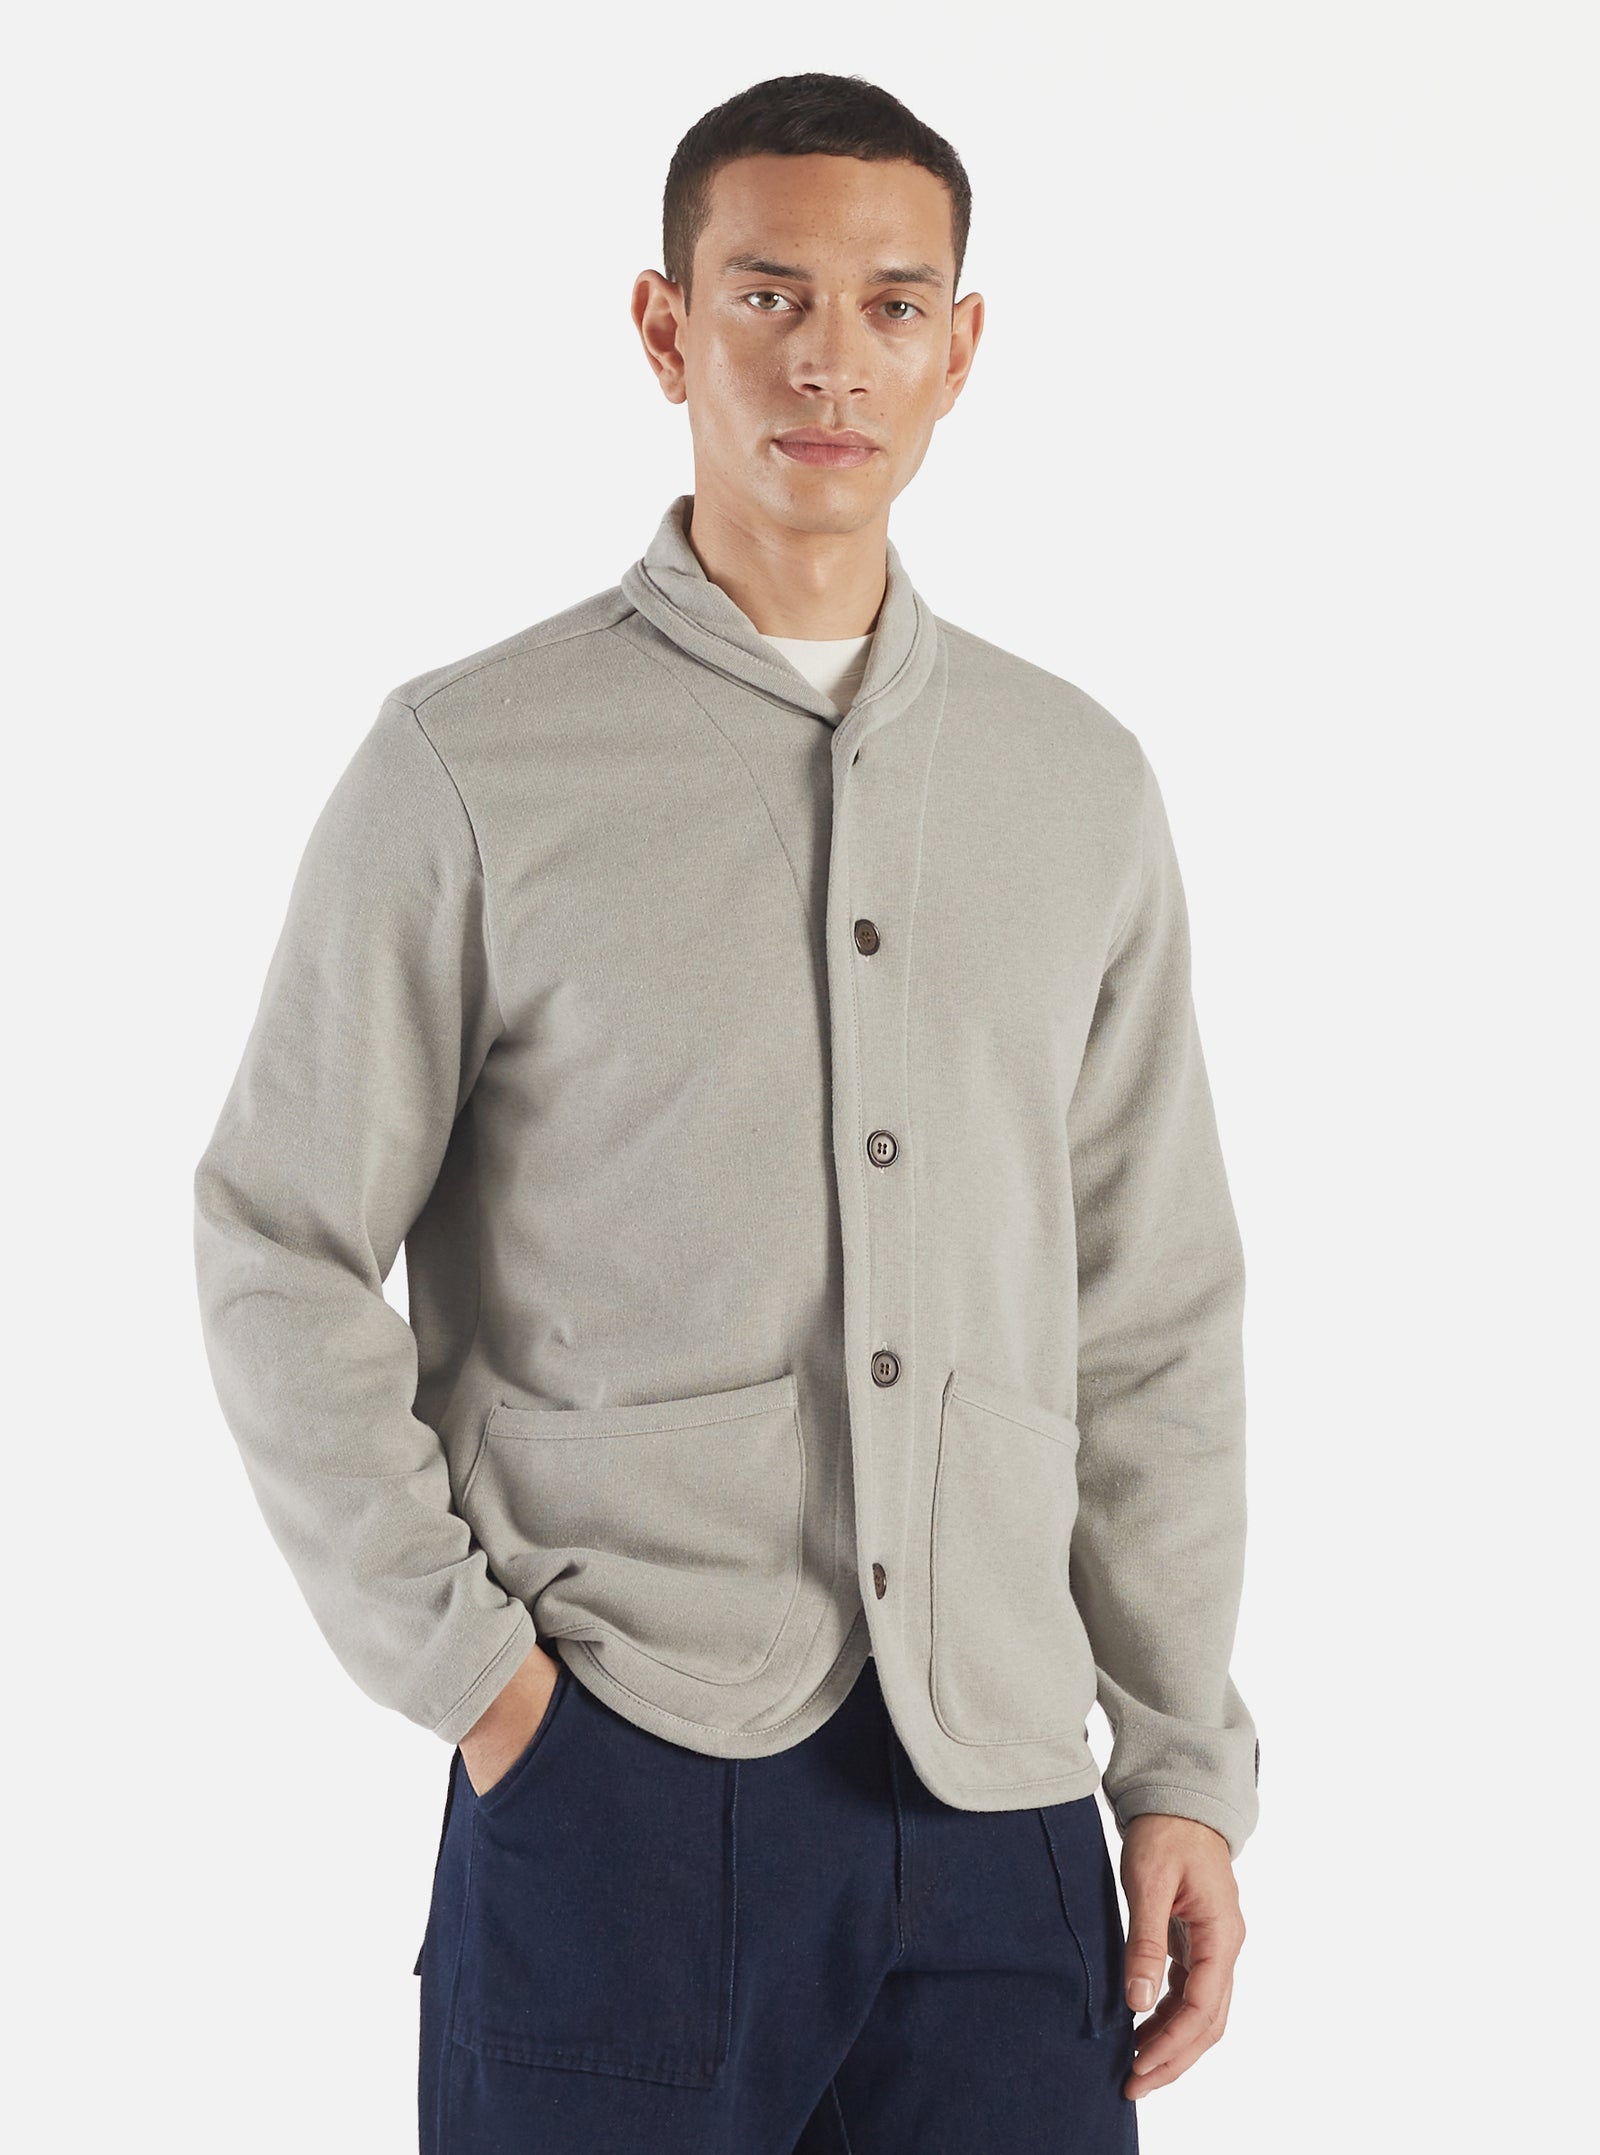 Universal Works Lancaster Jacket in Grey Marl Recycled Cotton Blend Jersey